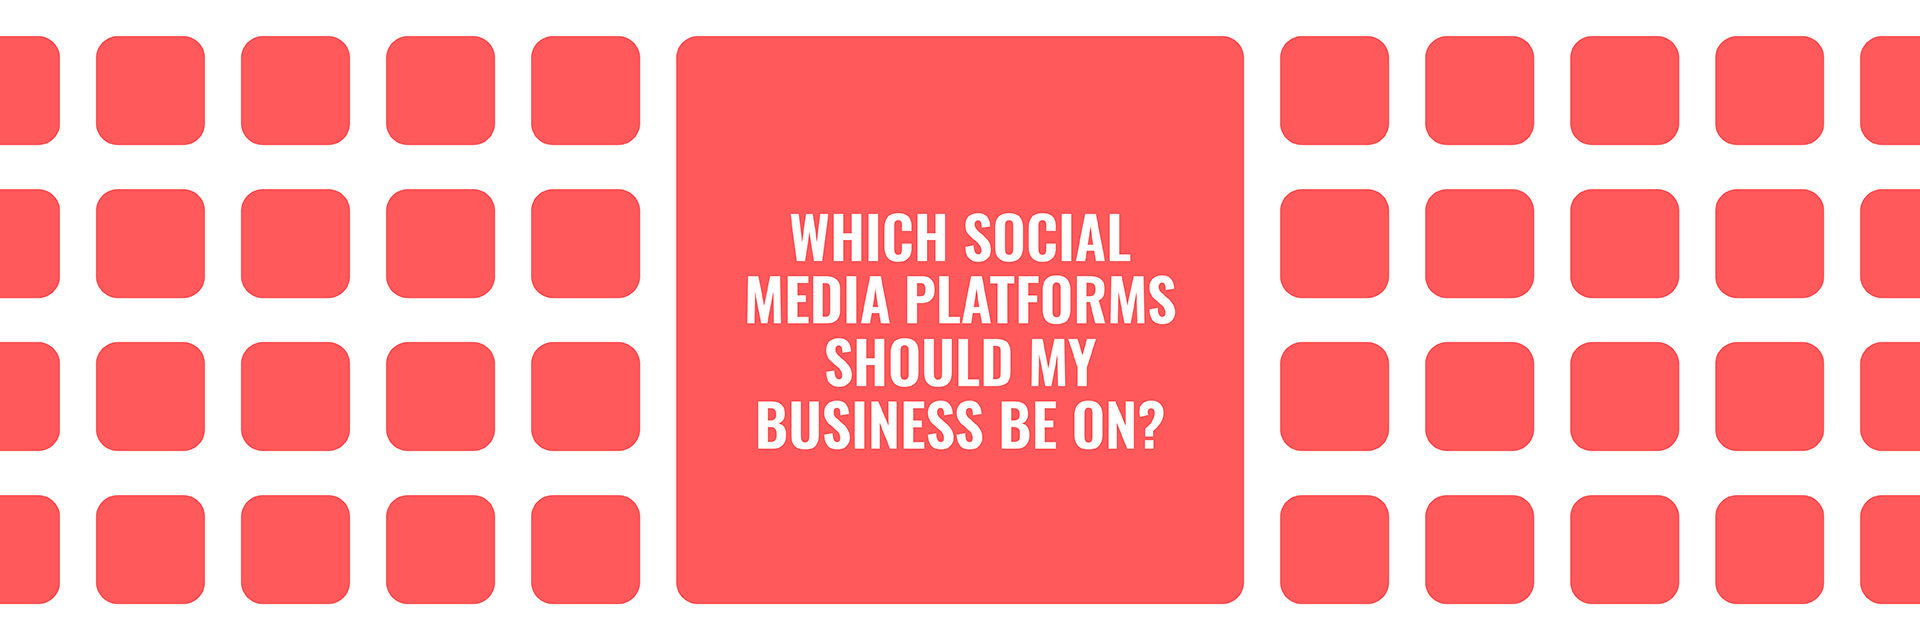 Which social media platforms should my business be on?